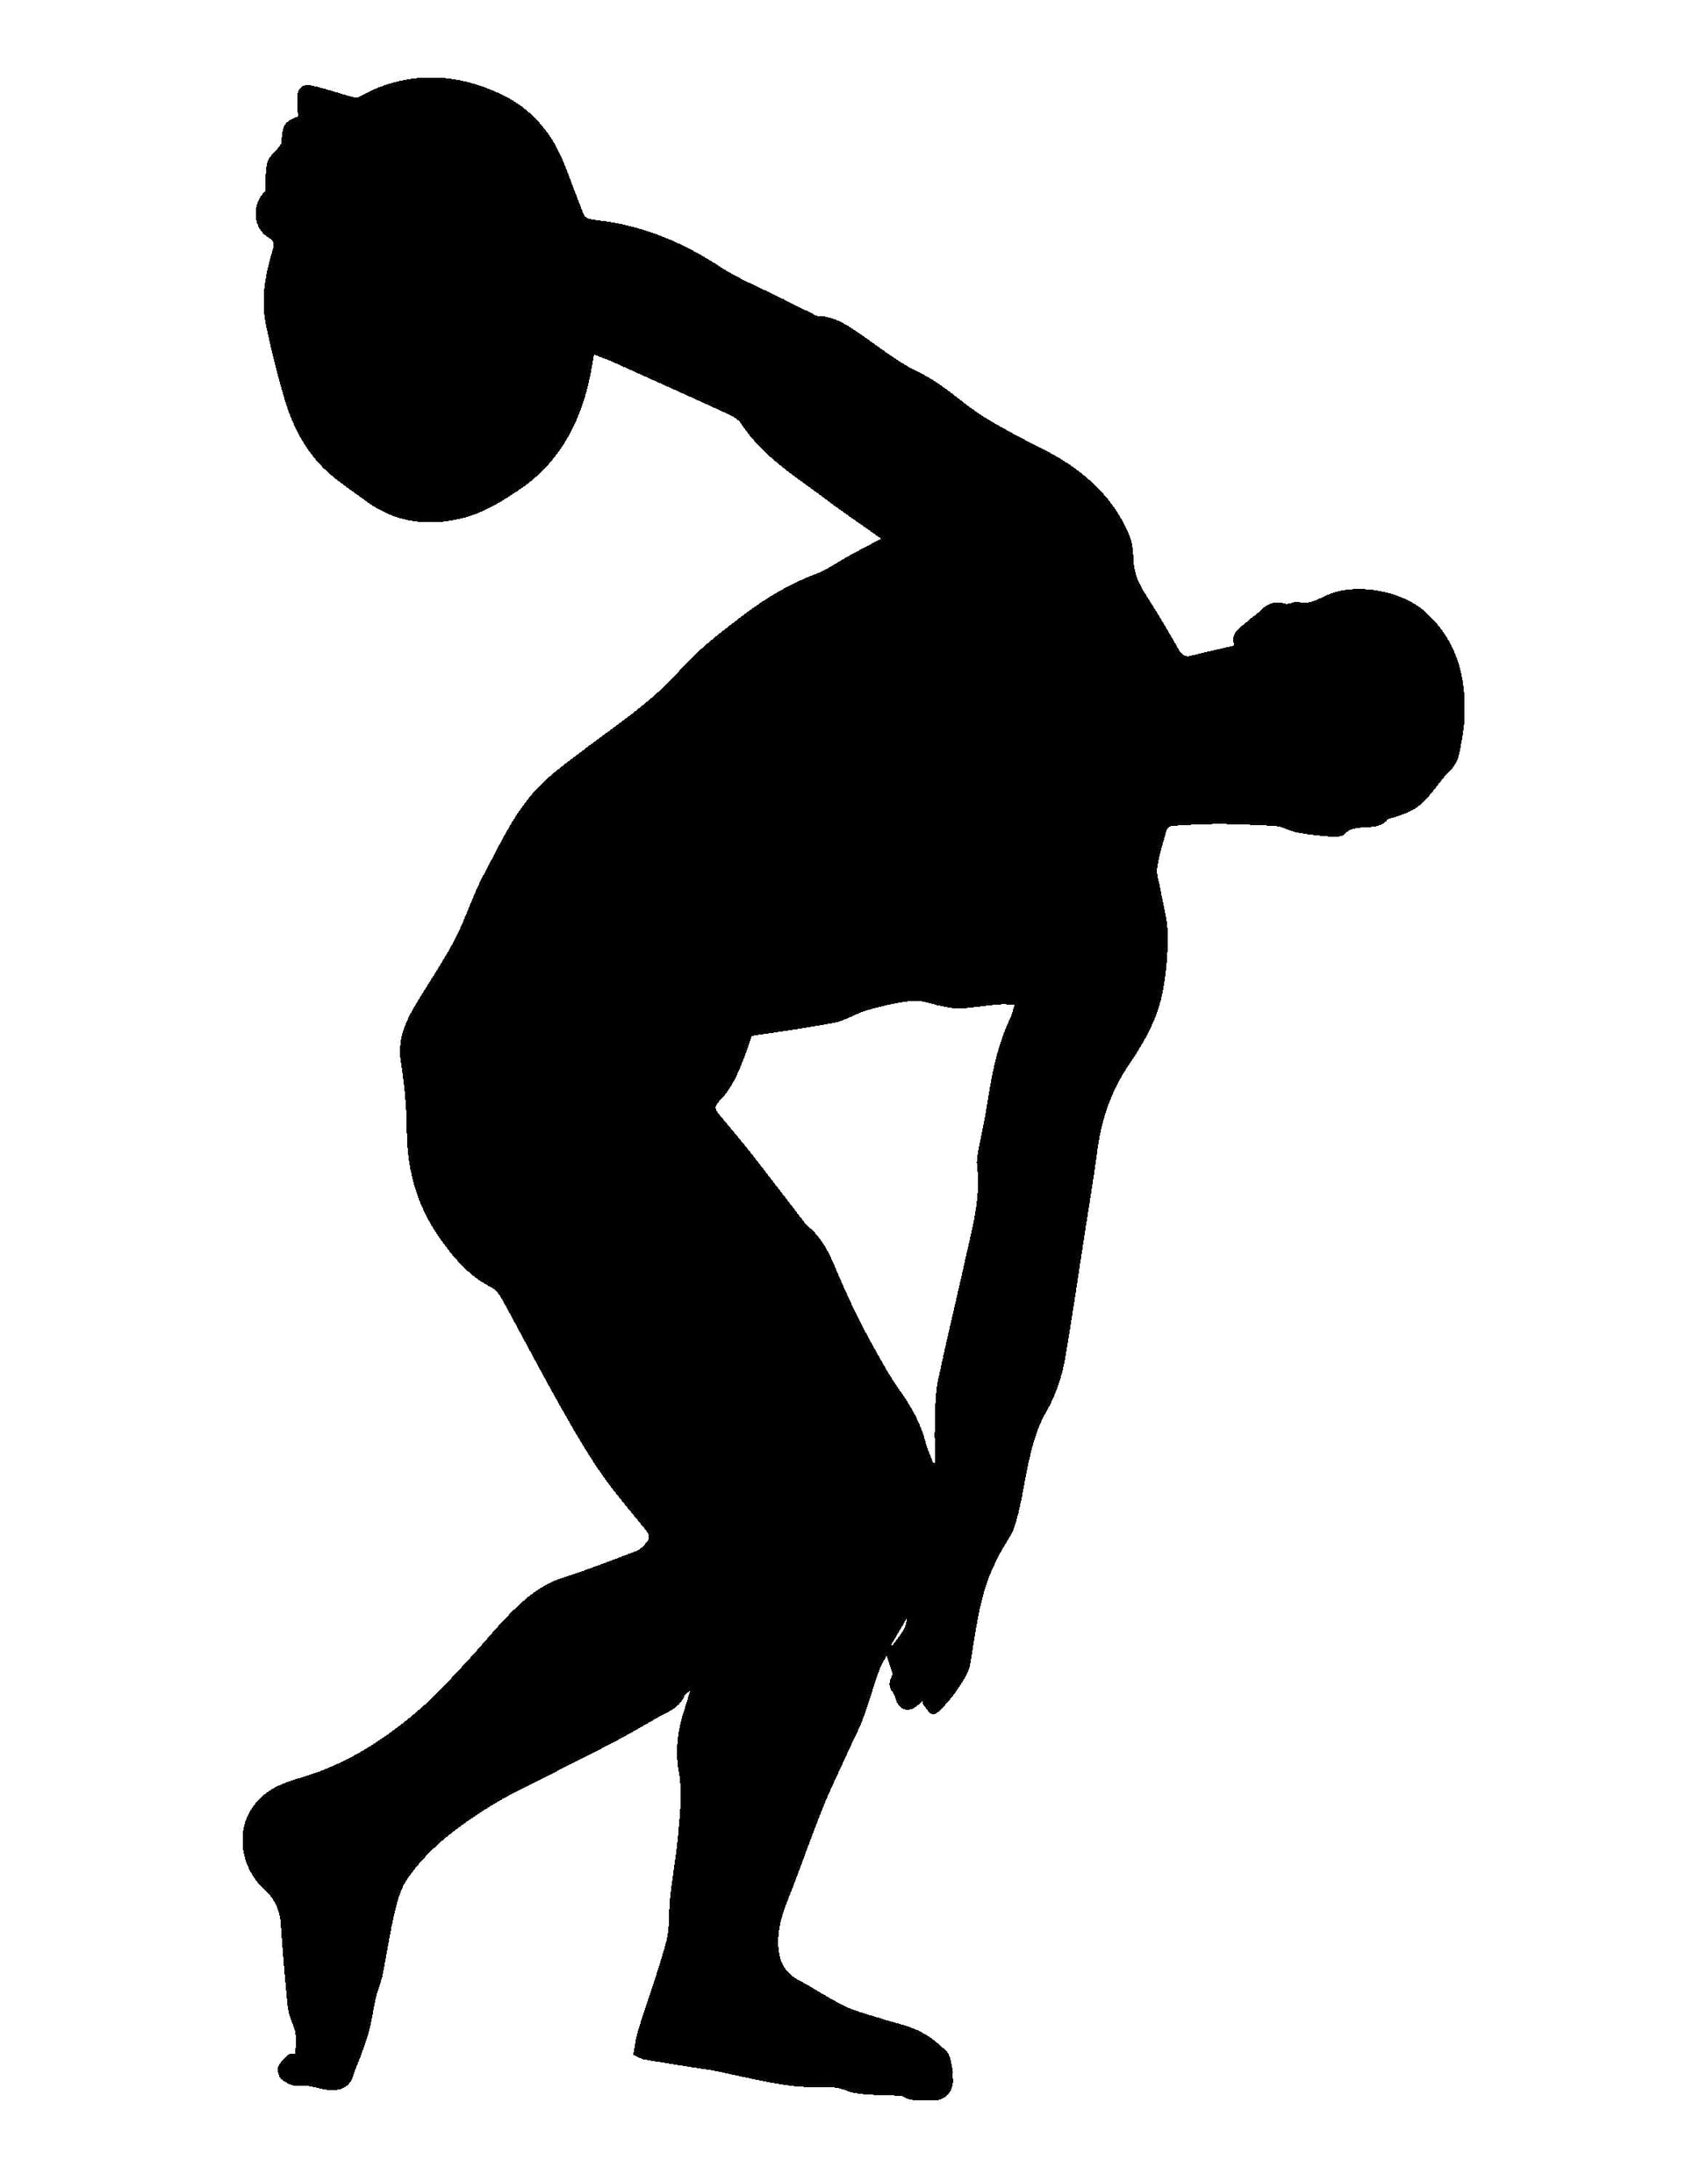 discus thrower silhouette